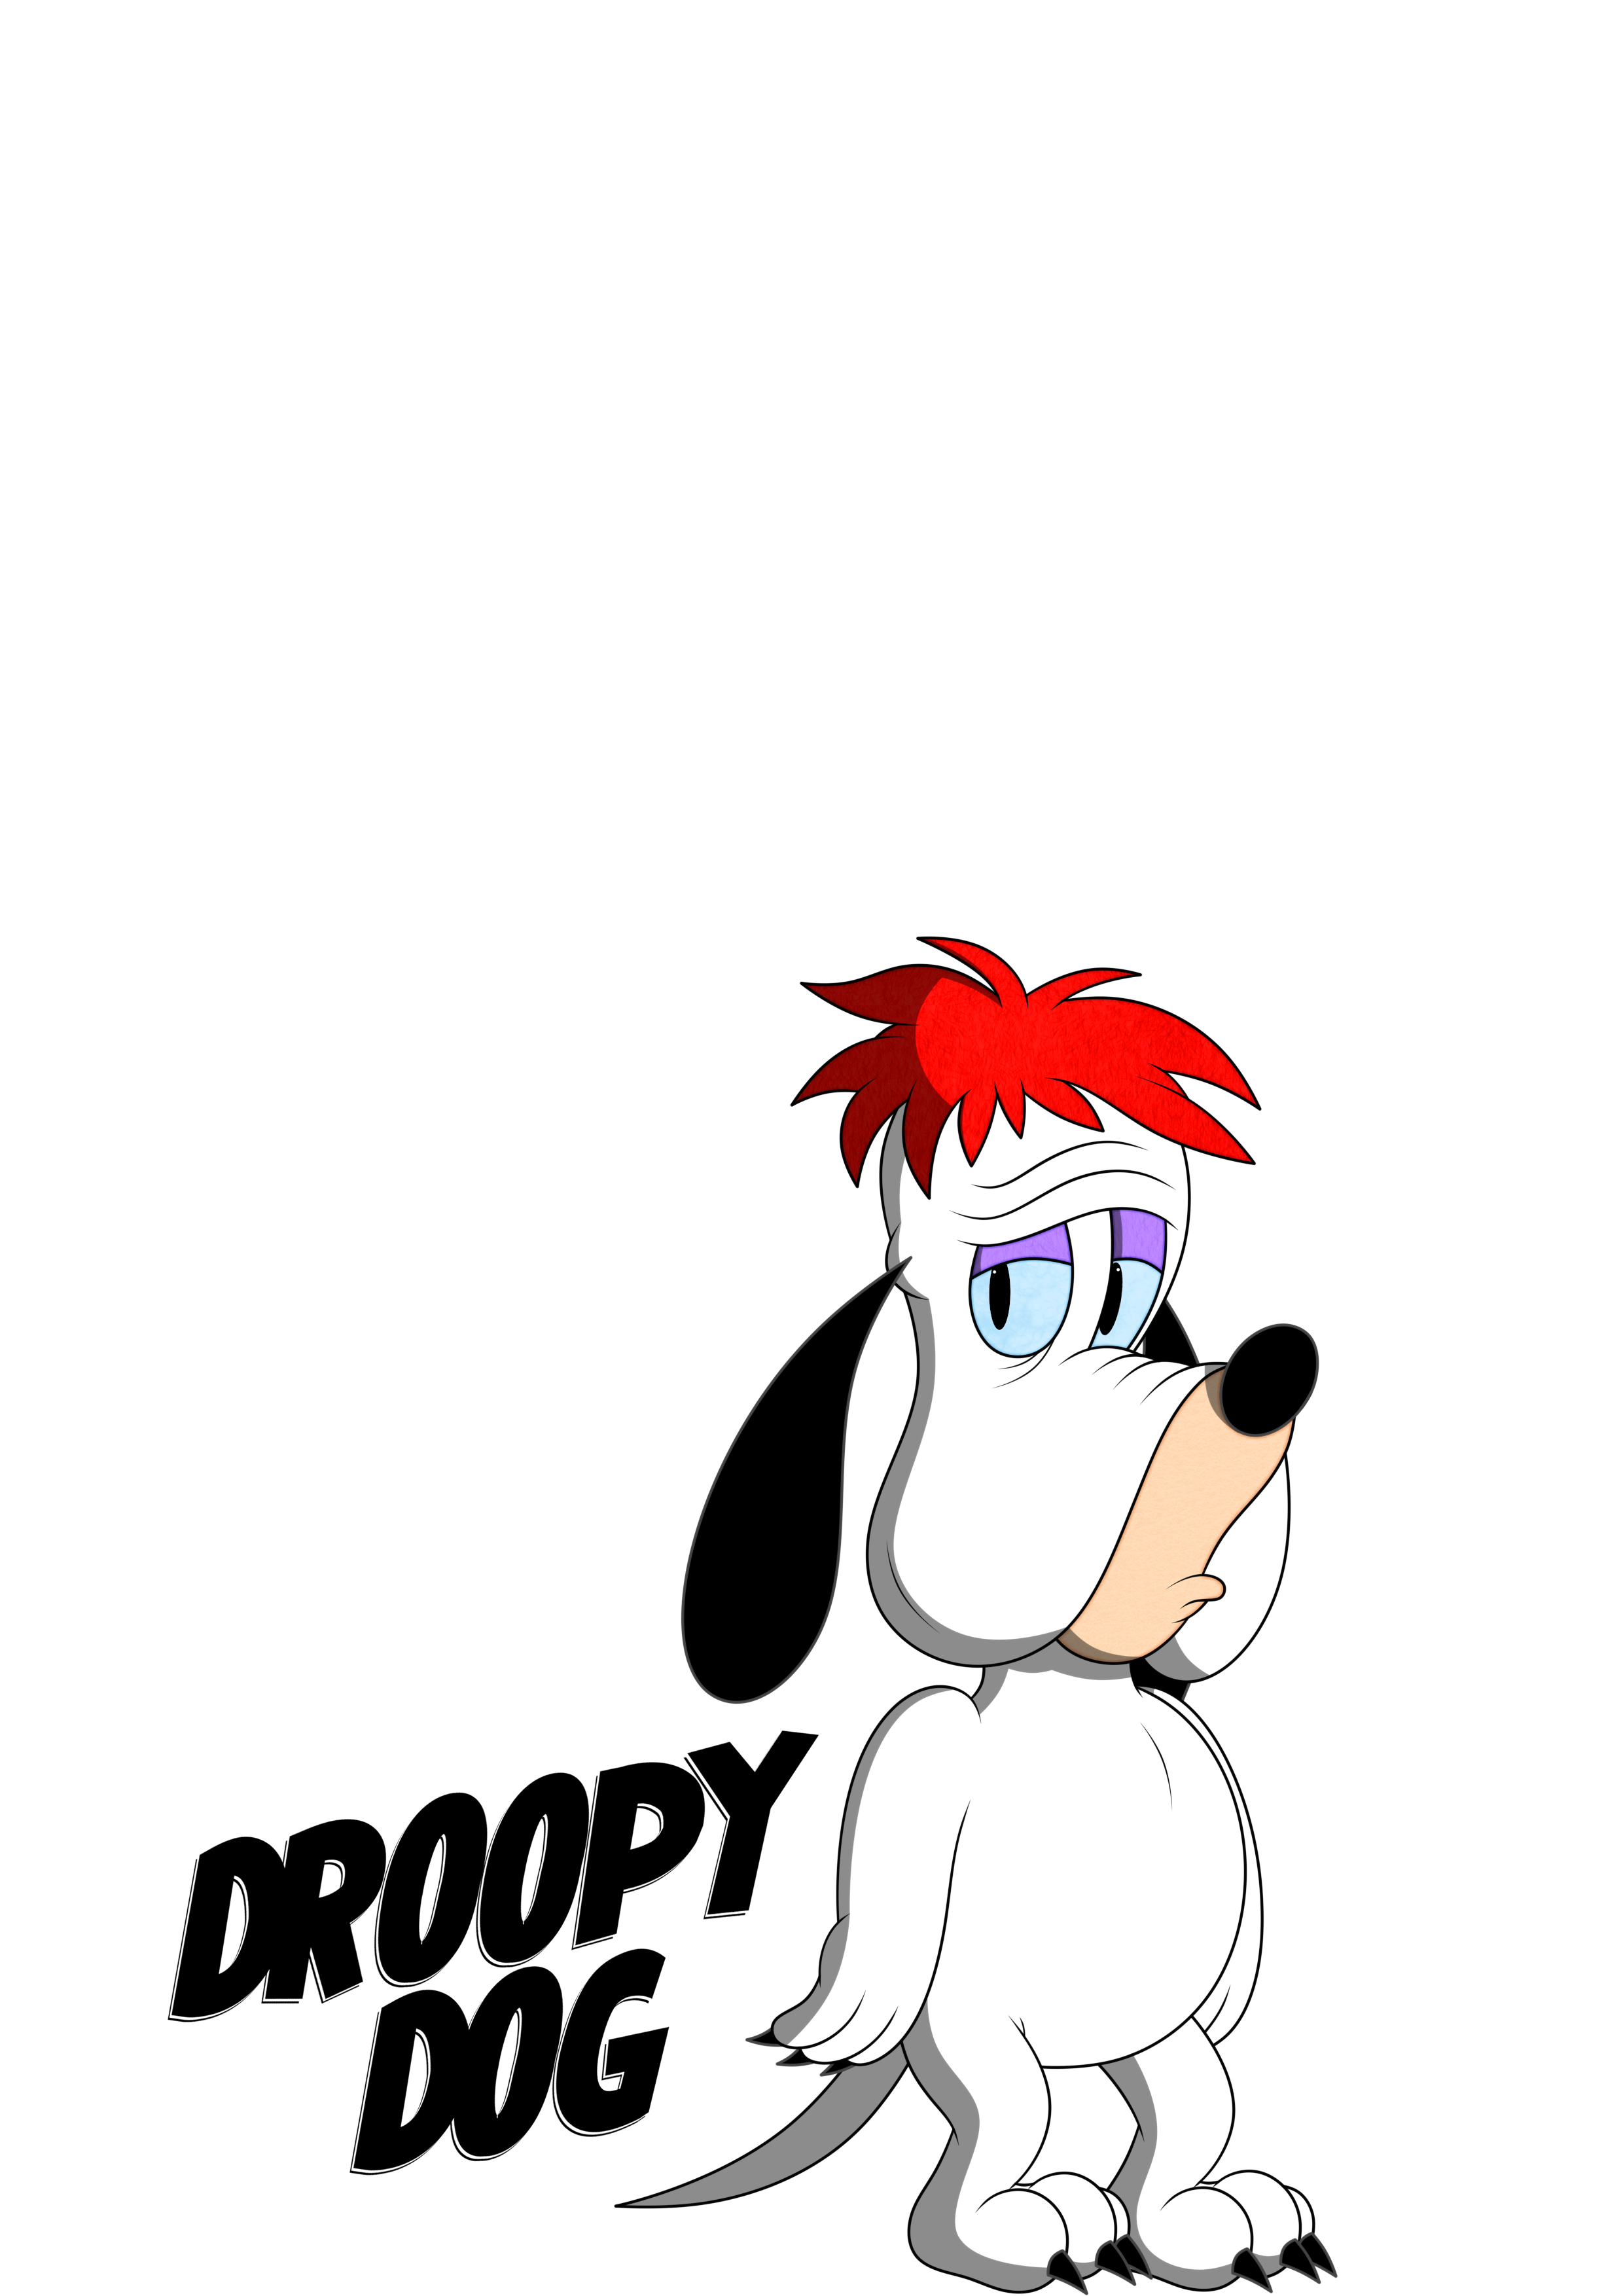 Droopy Dog by CameronTheOne on DeviantArt